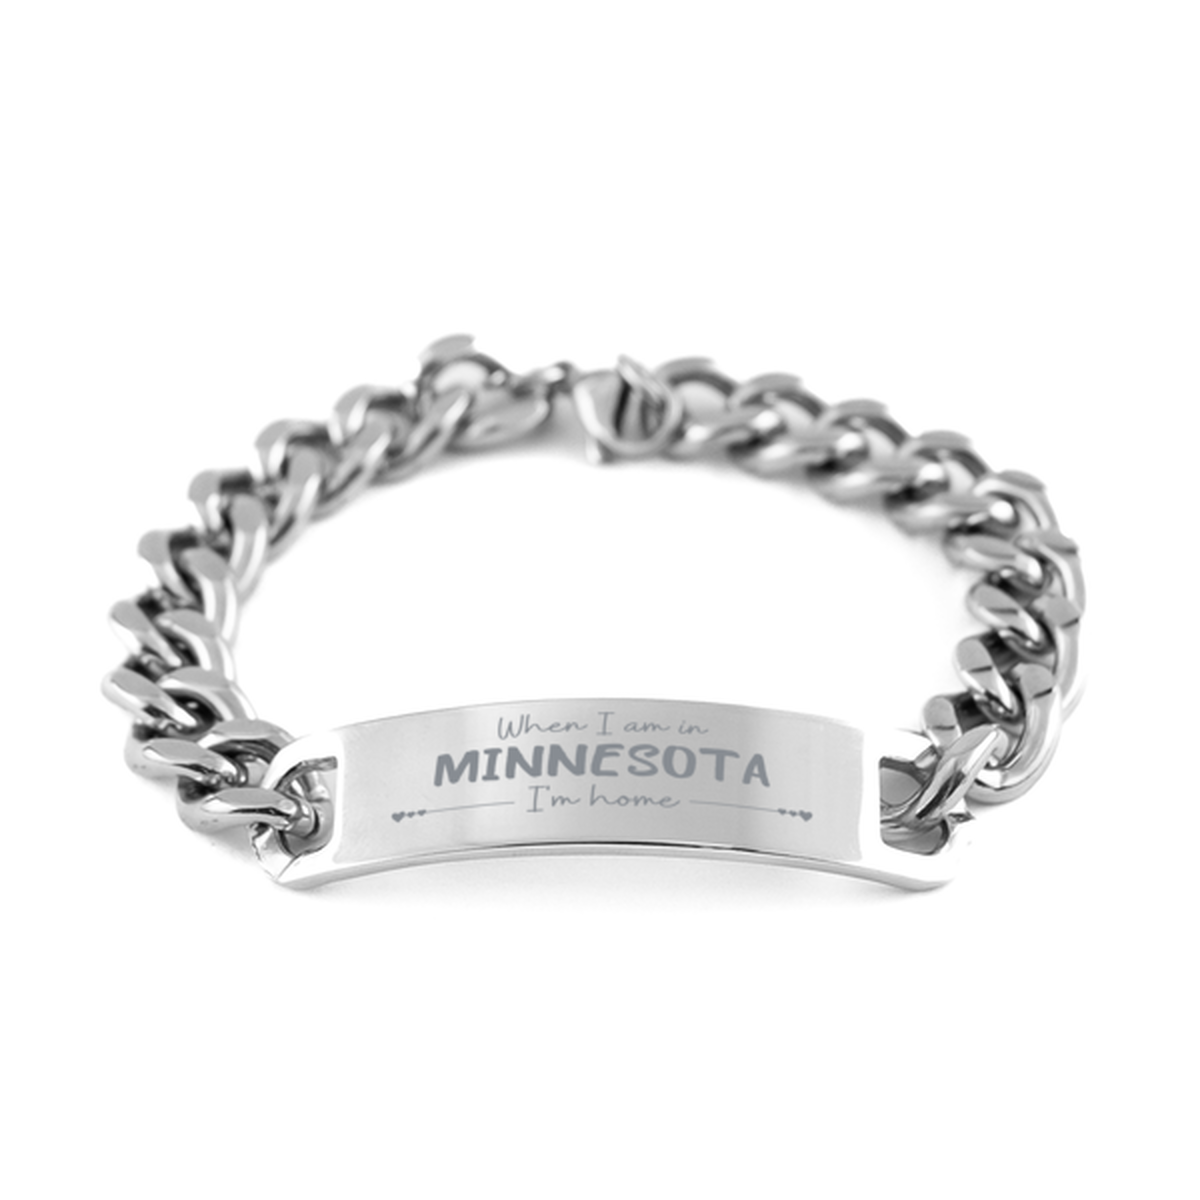 When I am in Minnesota I'm home Cuban Chain Stainless Steel Bracelet, Cheap Gifts For Minnesota, State Minnesota Birthday Gifts for Friends Coworker